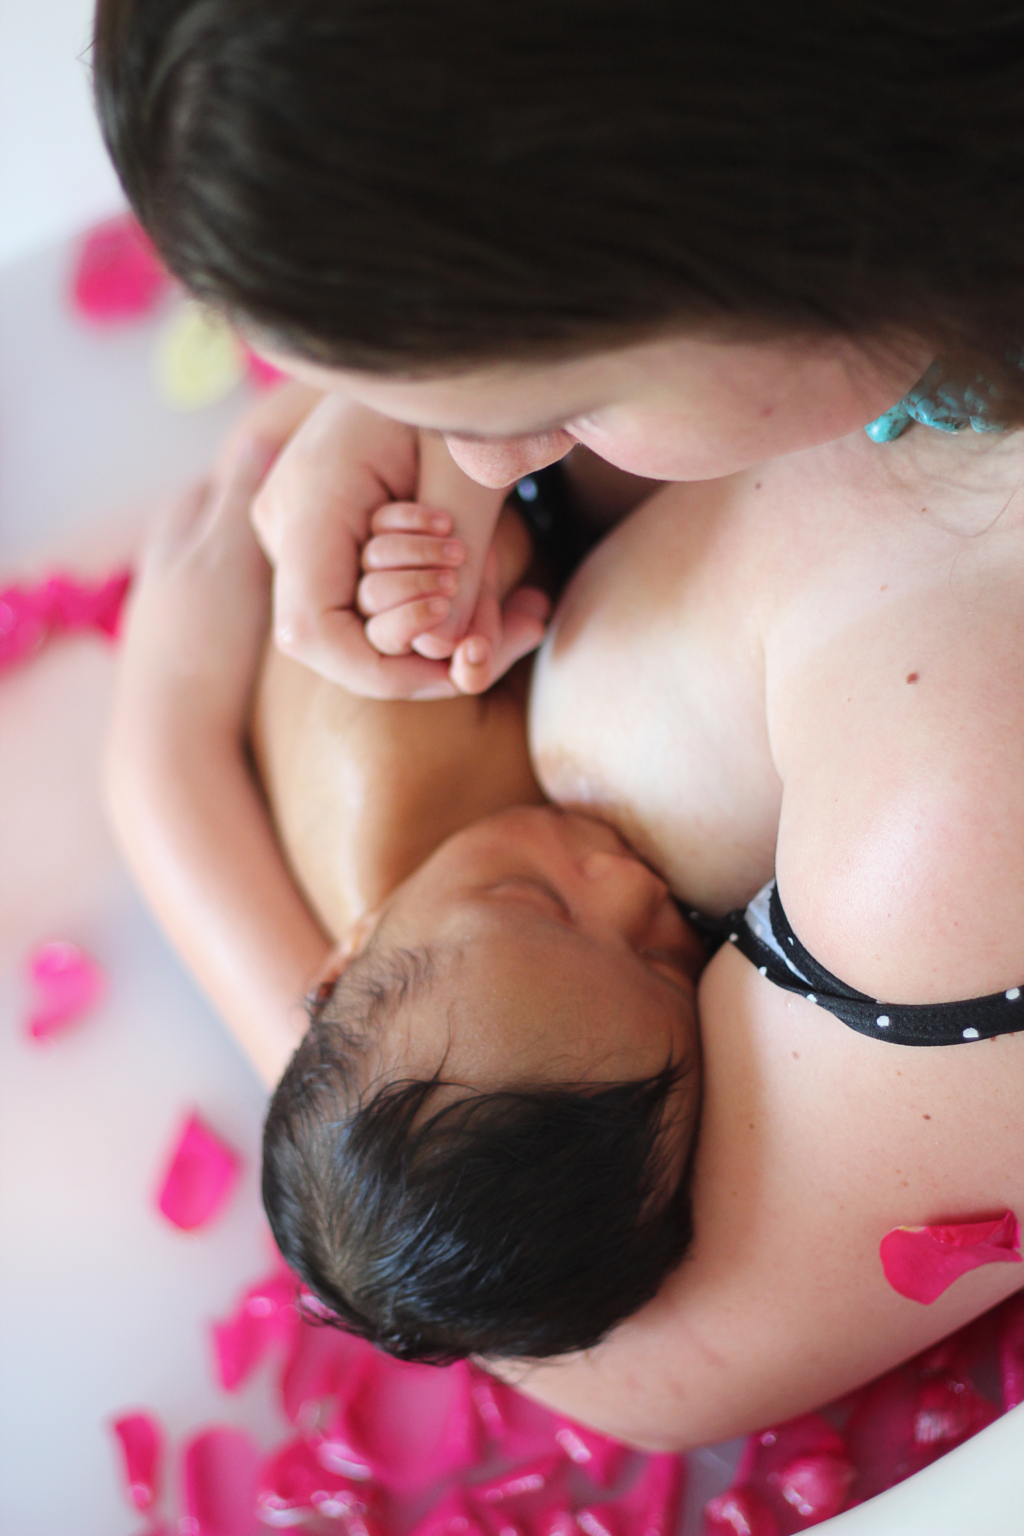 Mother breastfeeding her baby in a milk bath with rose petals.